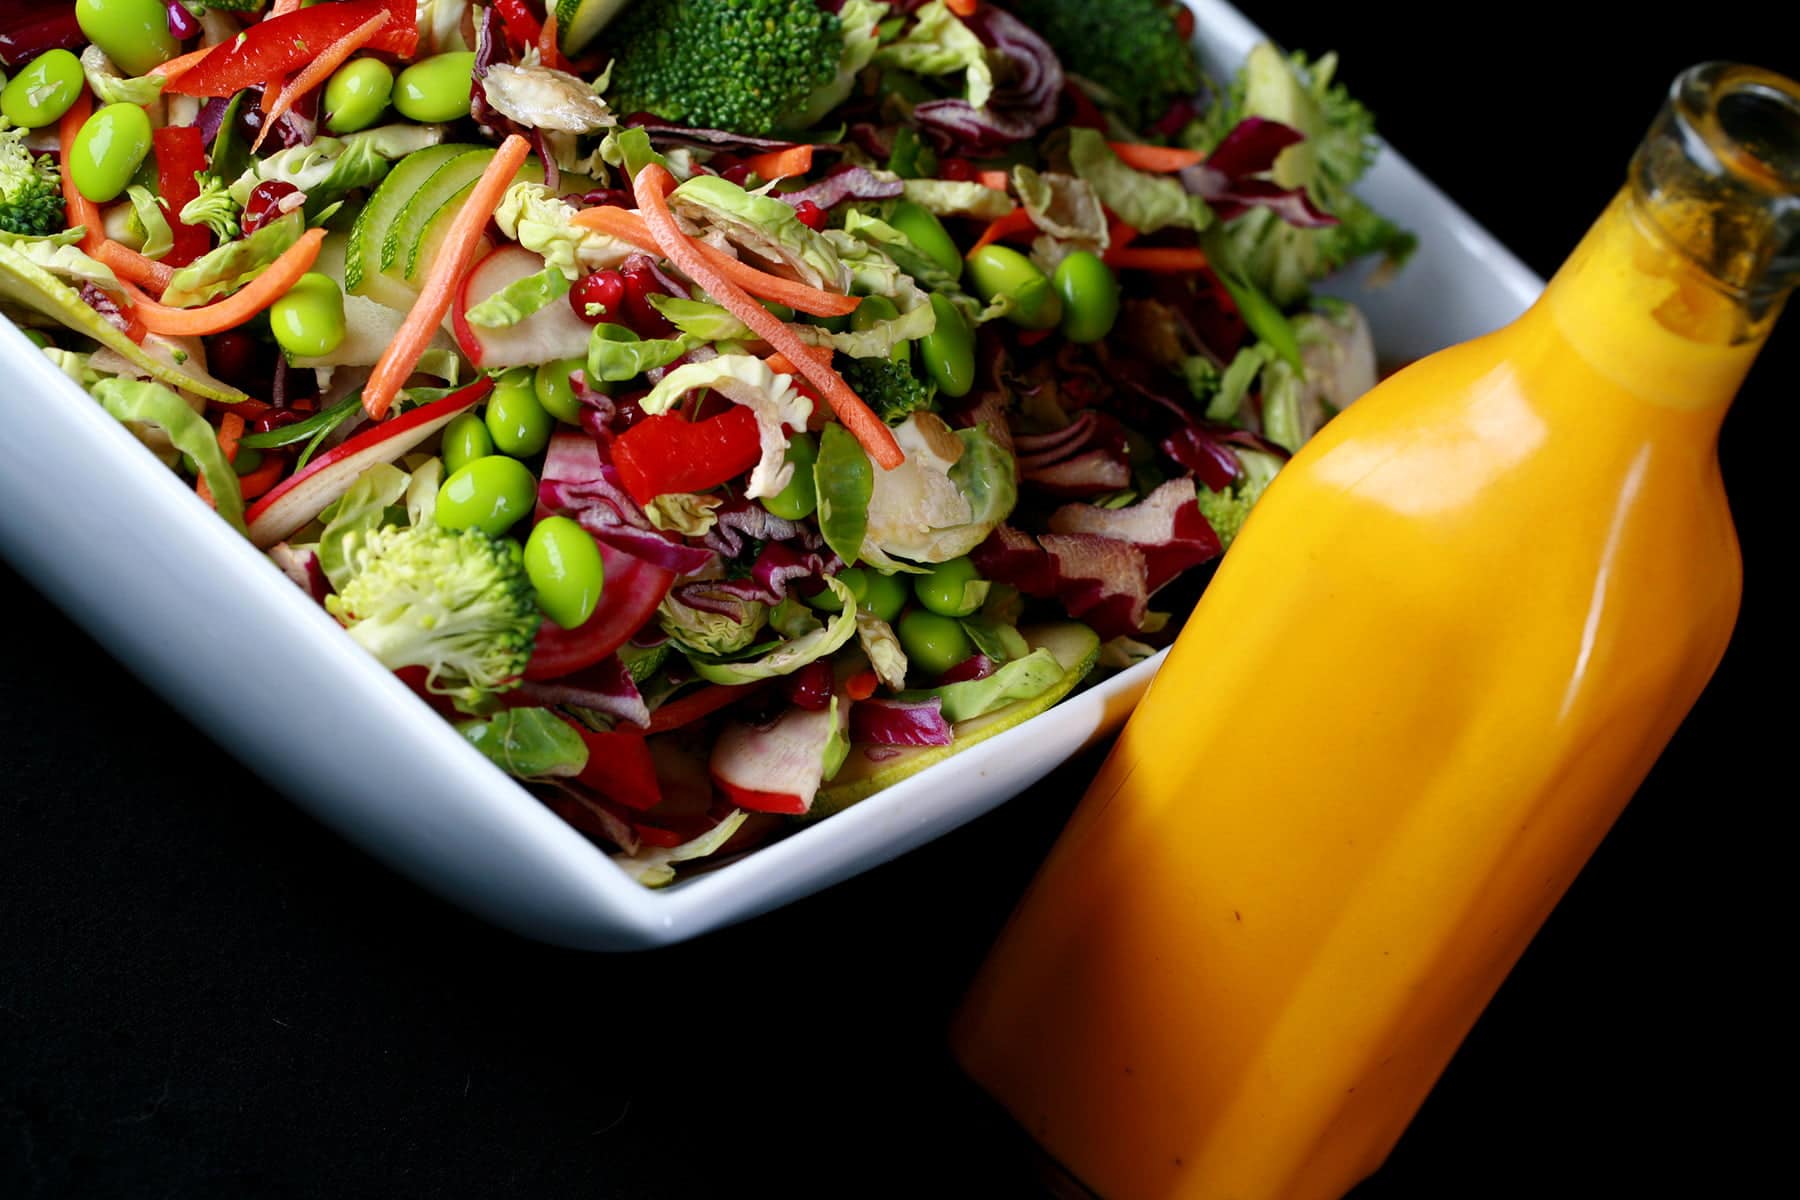 A close up view of rainbow salad. Cucumber slices, edamame, red peppers, carrot, purple cabbage, and red onions are all visible.  The salad is in a large white bowl, with a bottle of a bright orange carrot ginger dressing next to it.